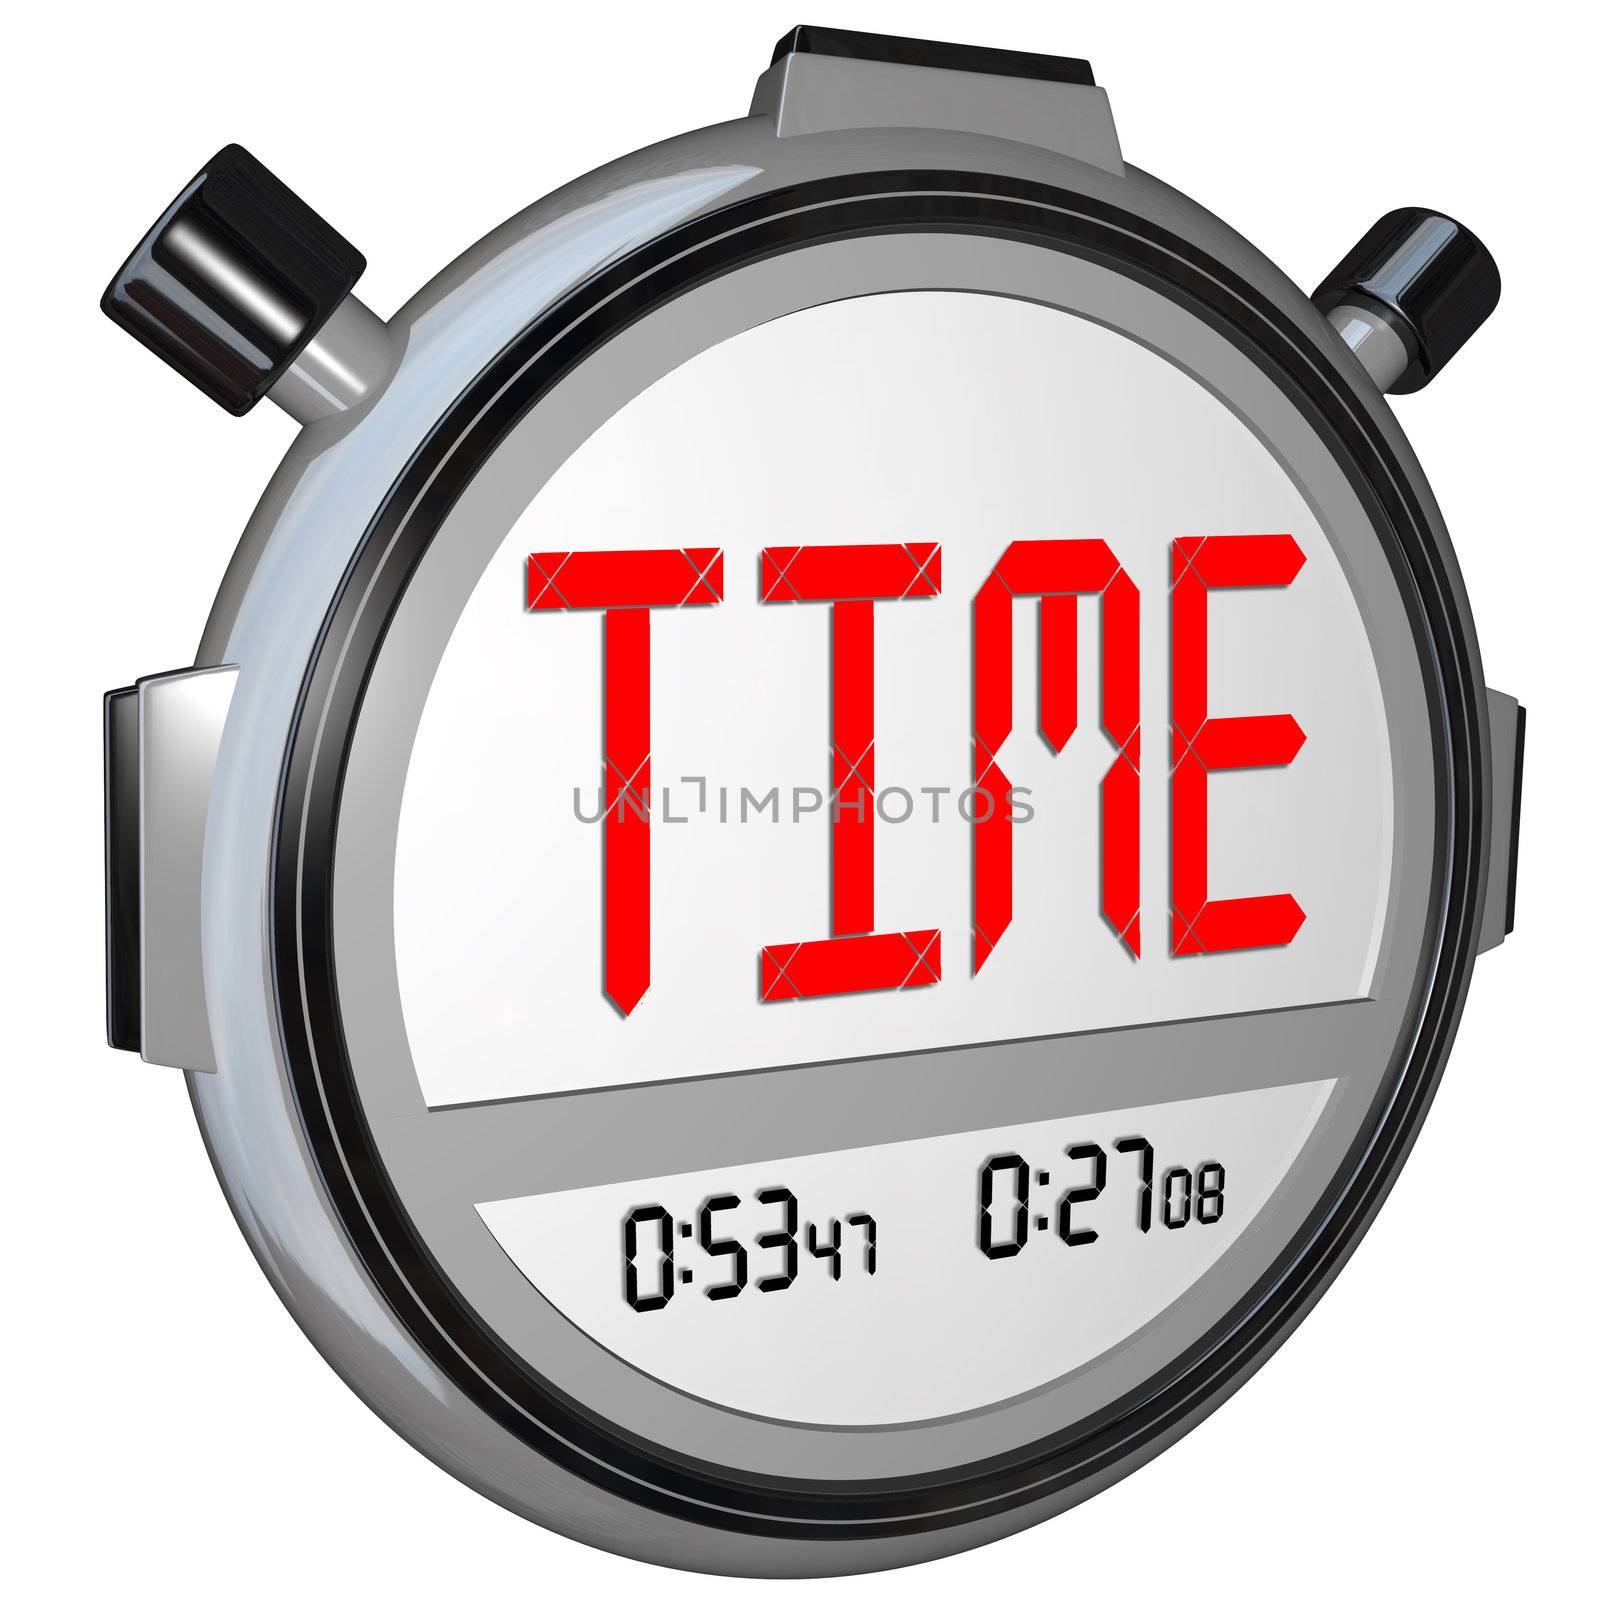 A stopwatch with the word Time measures the speed and acceleration as you race to meet a goal and achieve success